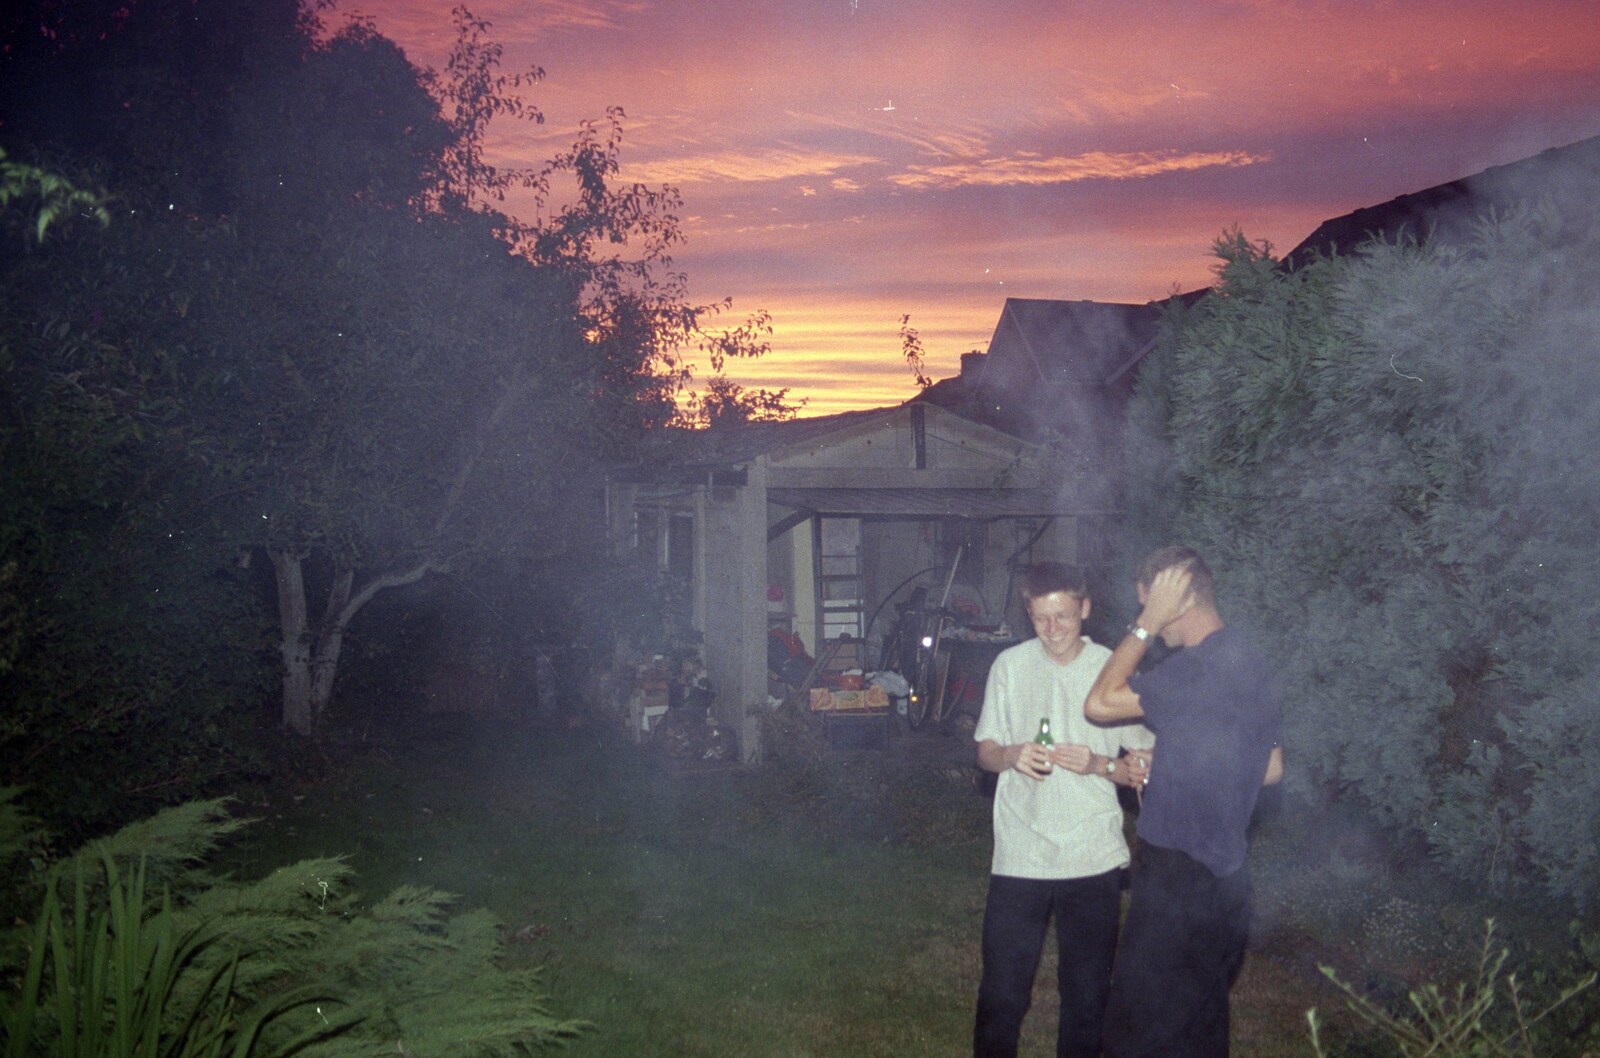 The Red Arrows, and Andrew's CISU Barbeque, Ipswich, Suffolk - 22nd July 2000: Sunset and smoke over Andrew's garden